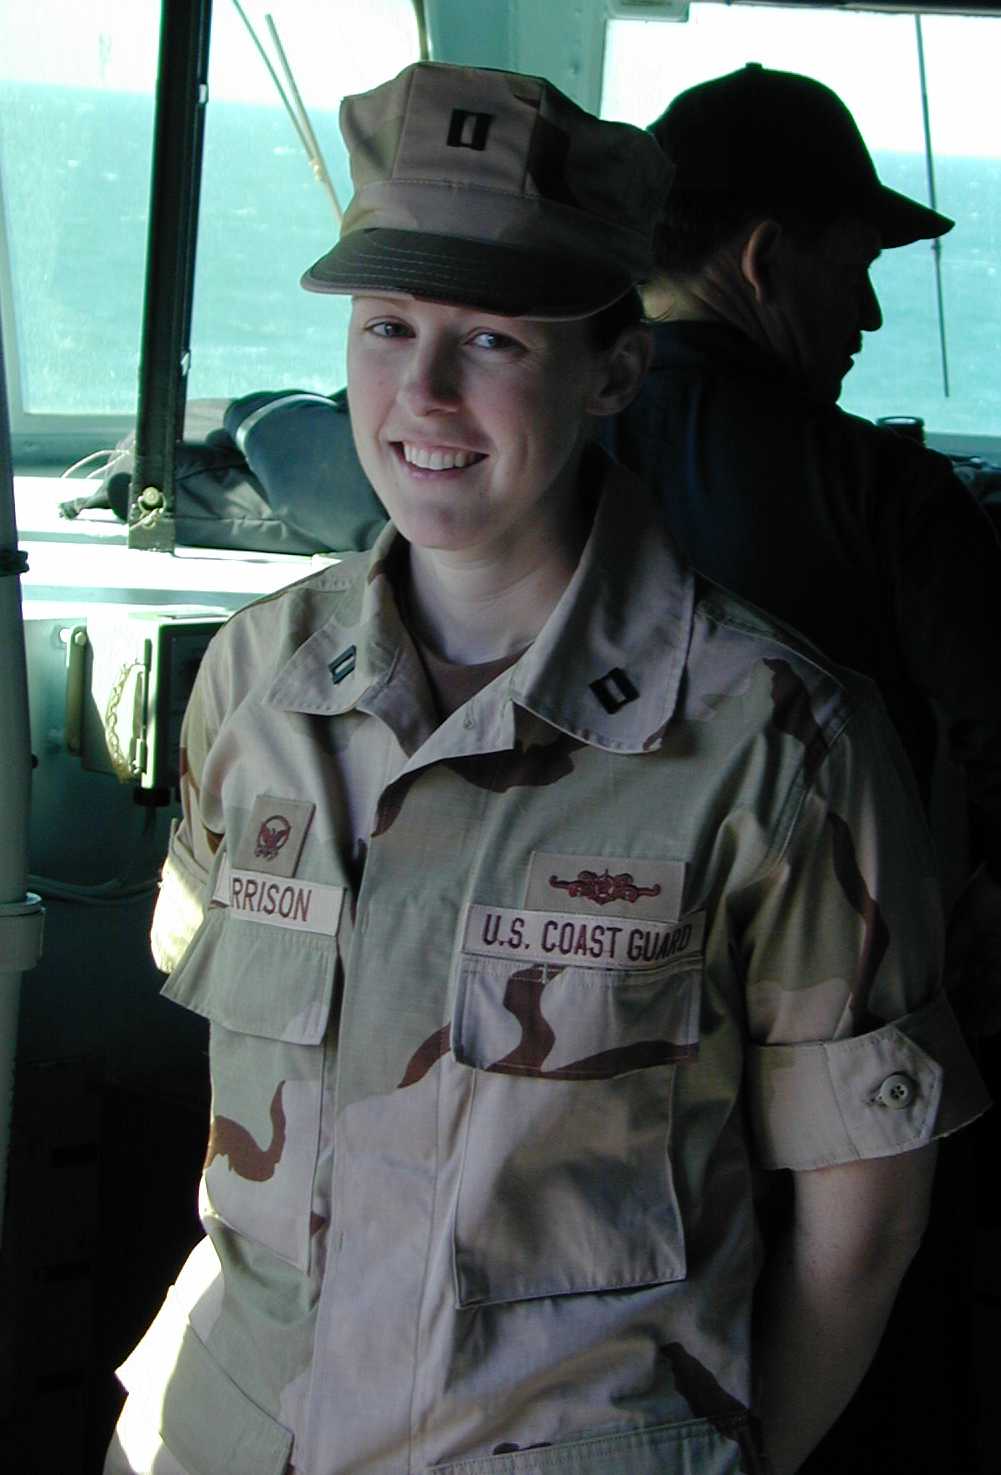 Lt. Holly Harrison, Coast Guard Cutter Aquidneck commanding officer and first female recipient of the Bronze Star Medal. (U.S. Coast Guard)